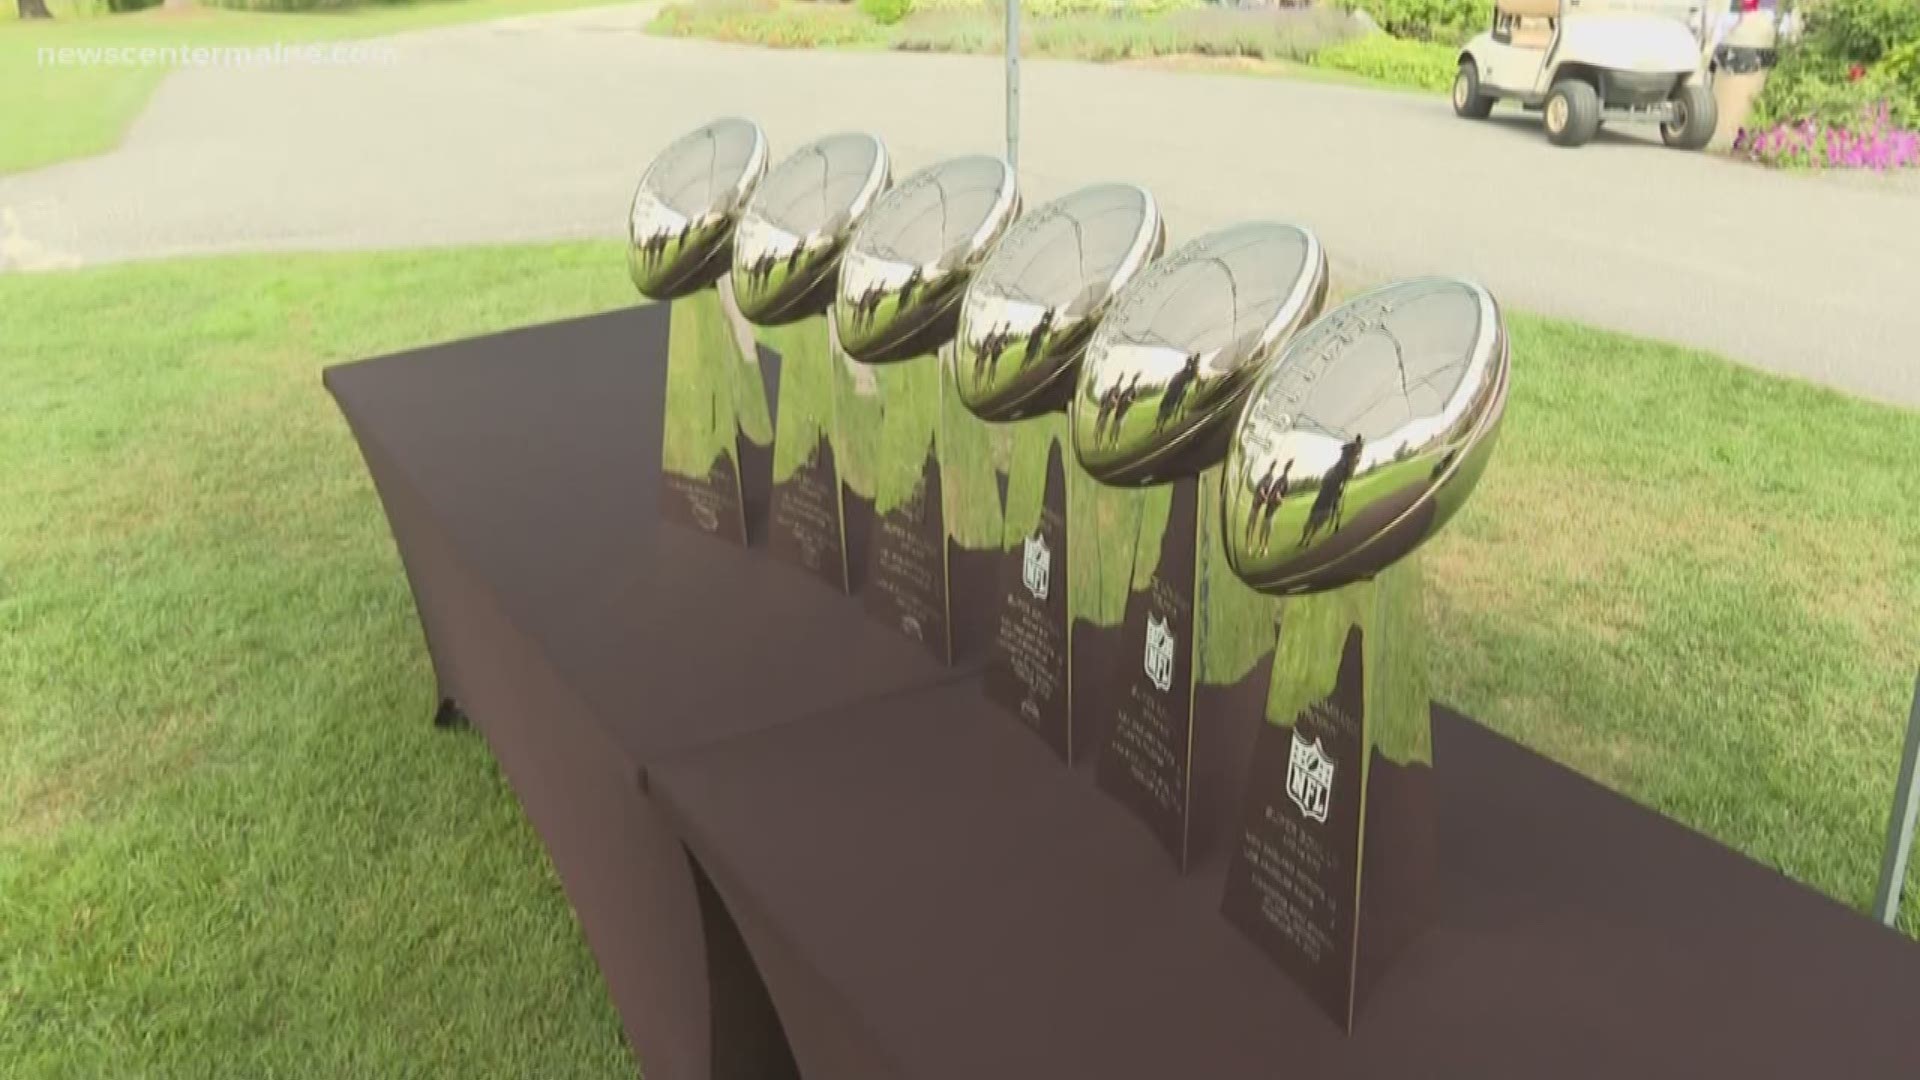 The six trophies from the Patriots' Super Bowl wins were in the state as part of an event for ALS.